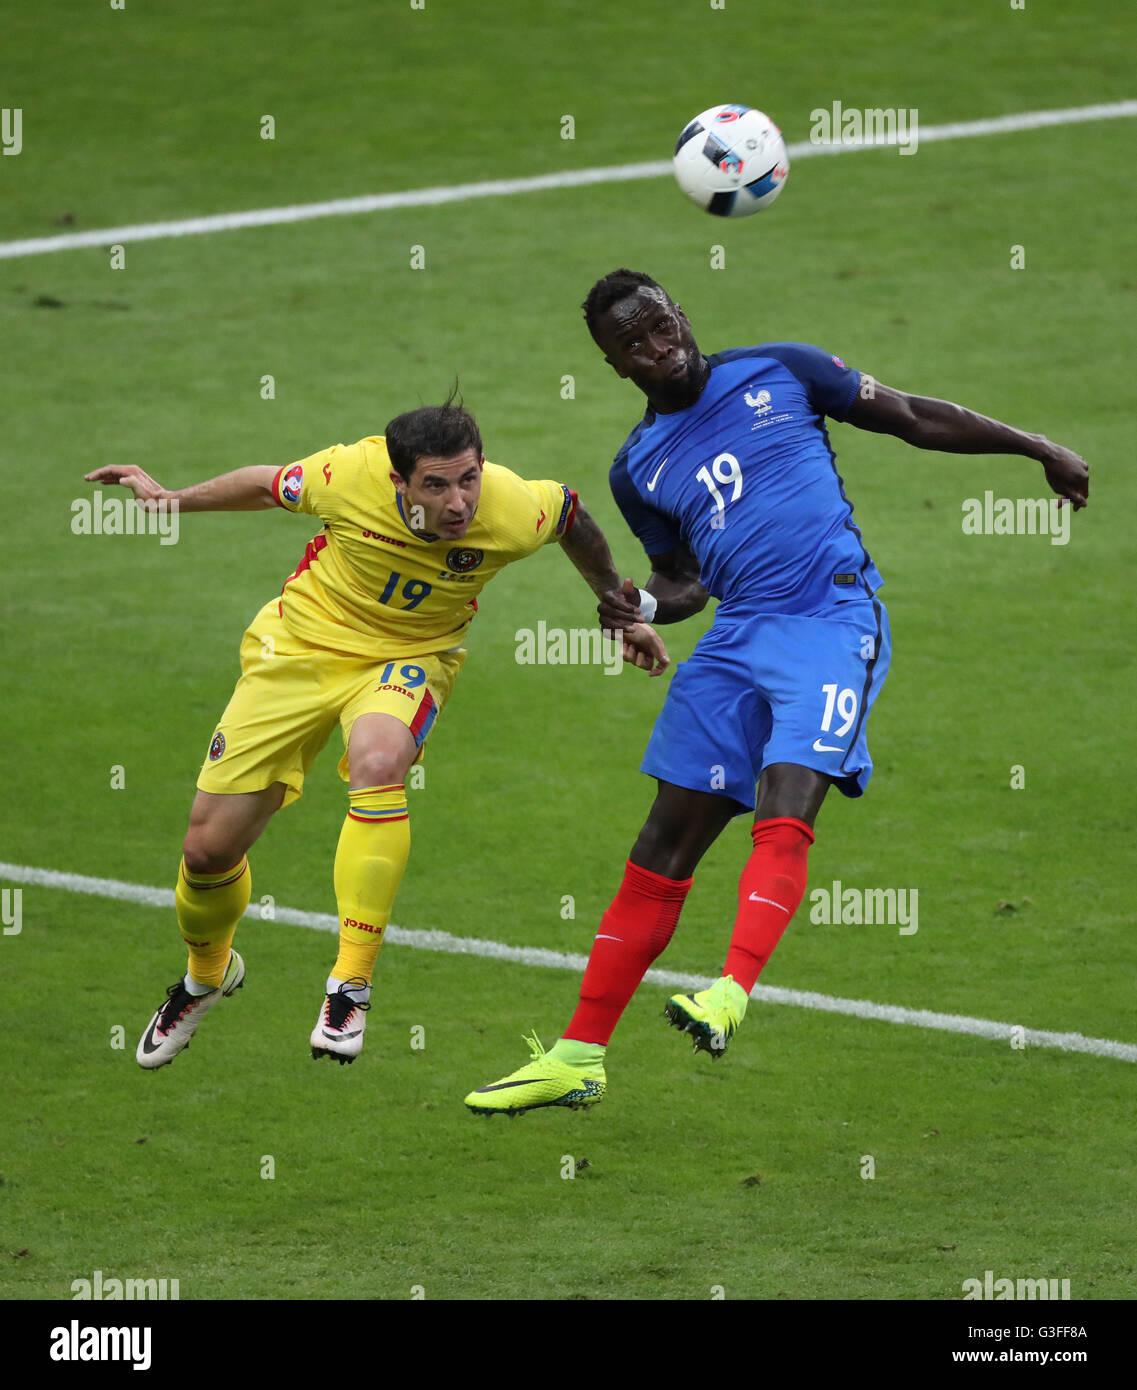 Paris, France. 10th June, 2016. Bacary Sagna (R) of France vies with Bogdan Stancu of Romania during the Euro 2016 Group A soccer match between France and Romania in Paris, France, June 10, 2016. Credit:  Bai Xuefei/Xinhua/Alamy Live News Stock Photo